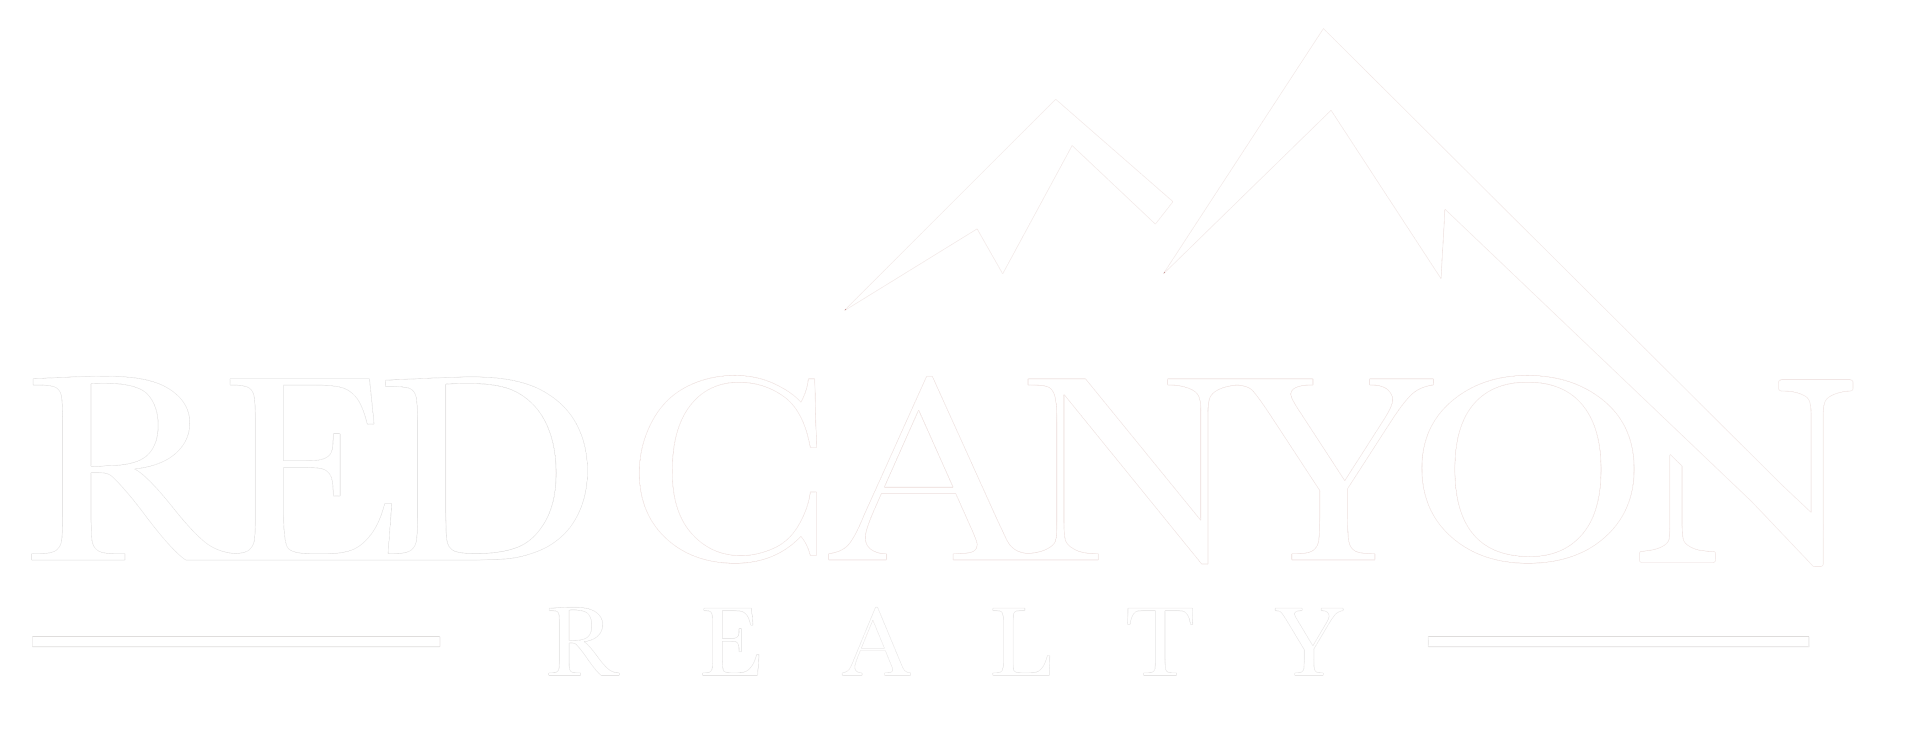 Red Canyon Realty Logo - White